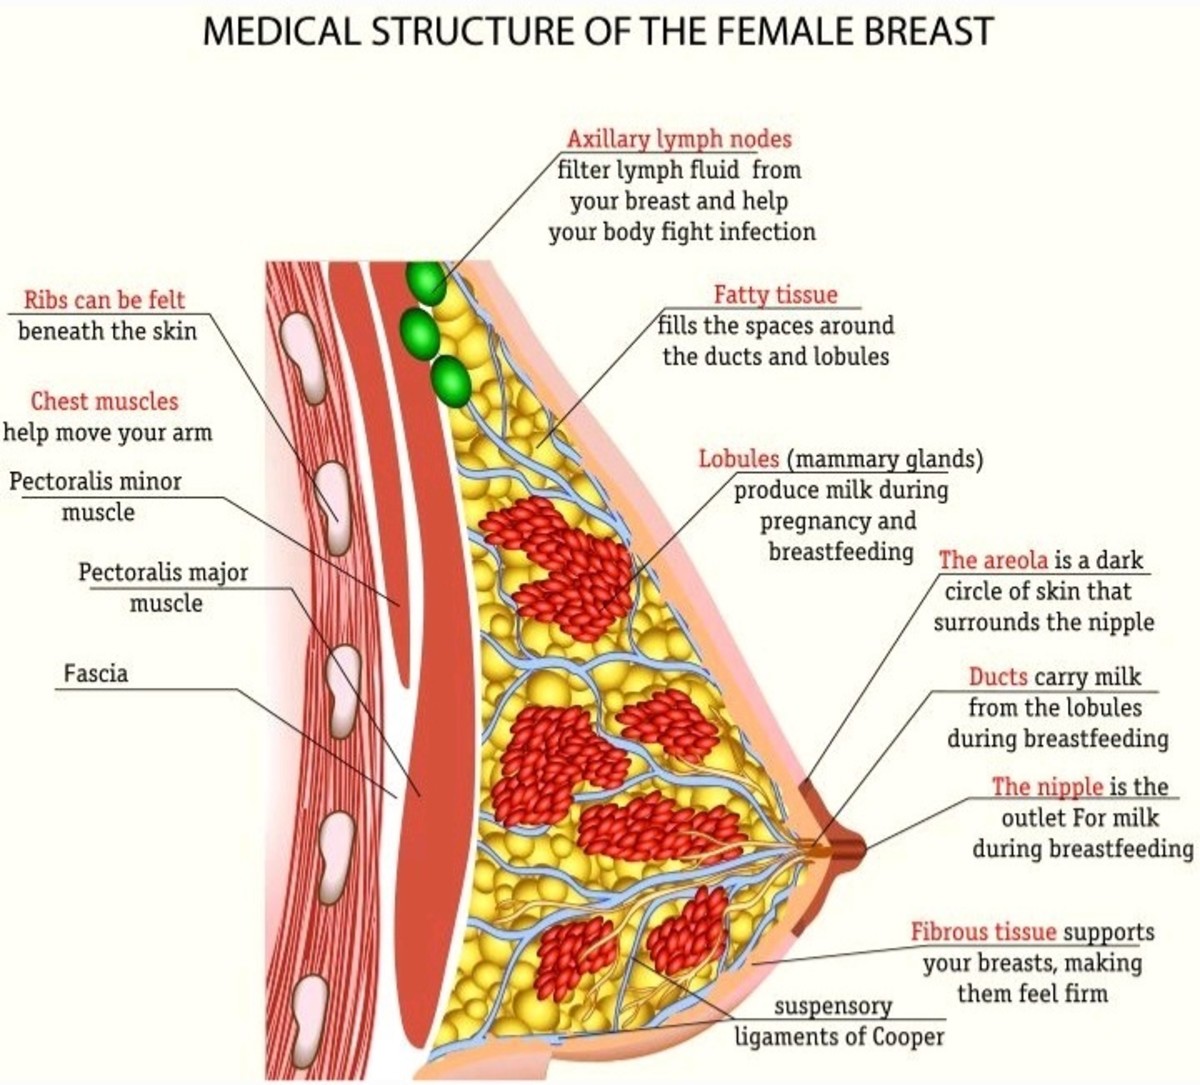 facts-that-no-one-tells-you-about-breast-cancer-risk-factors-types-care-and-management-of-the-breasts-cancer